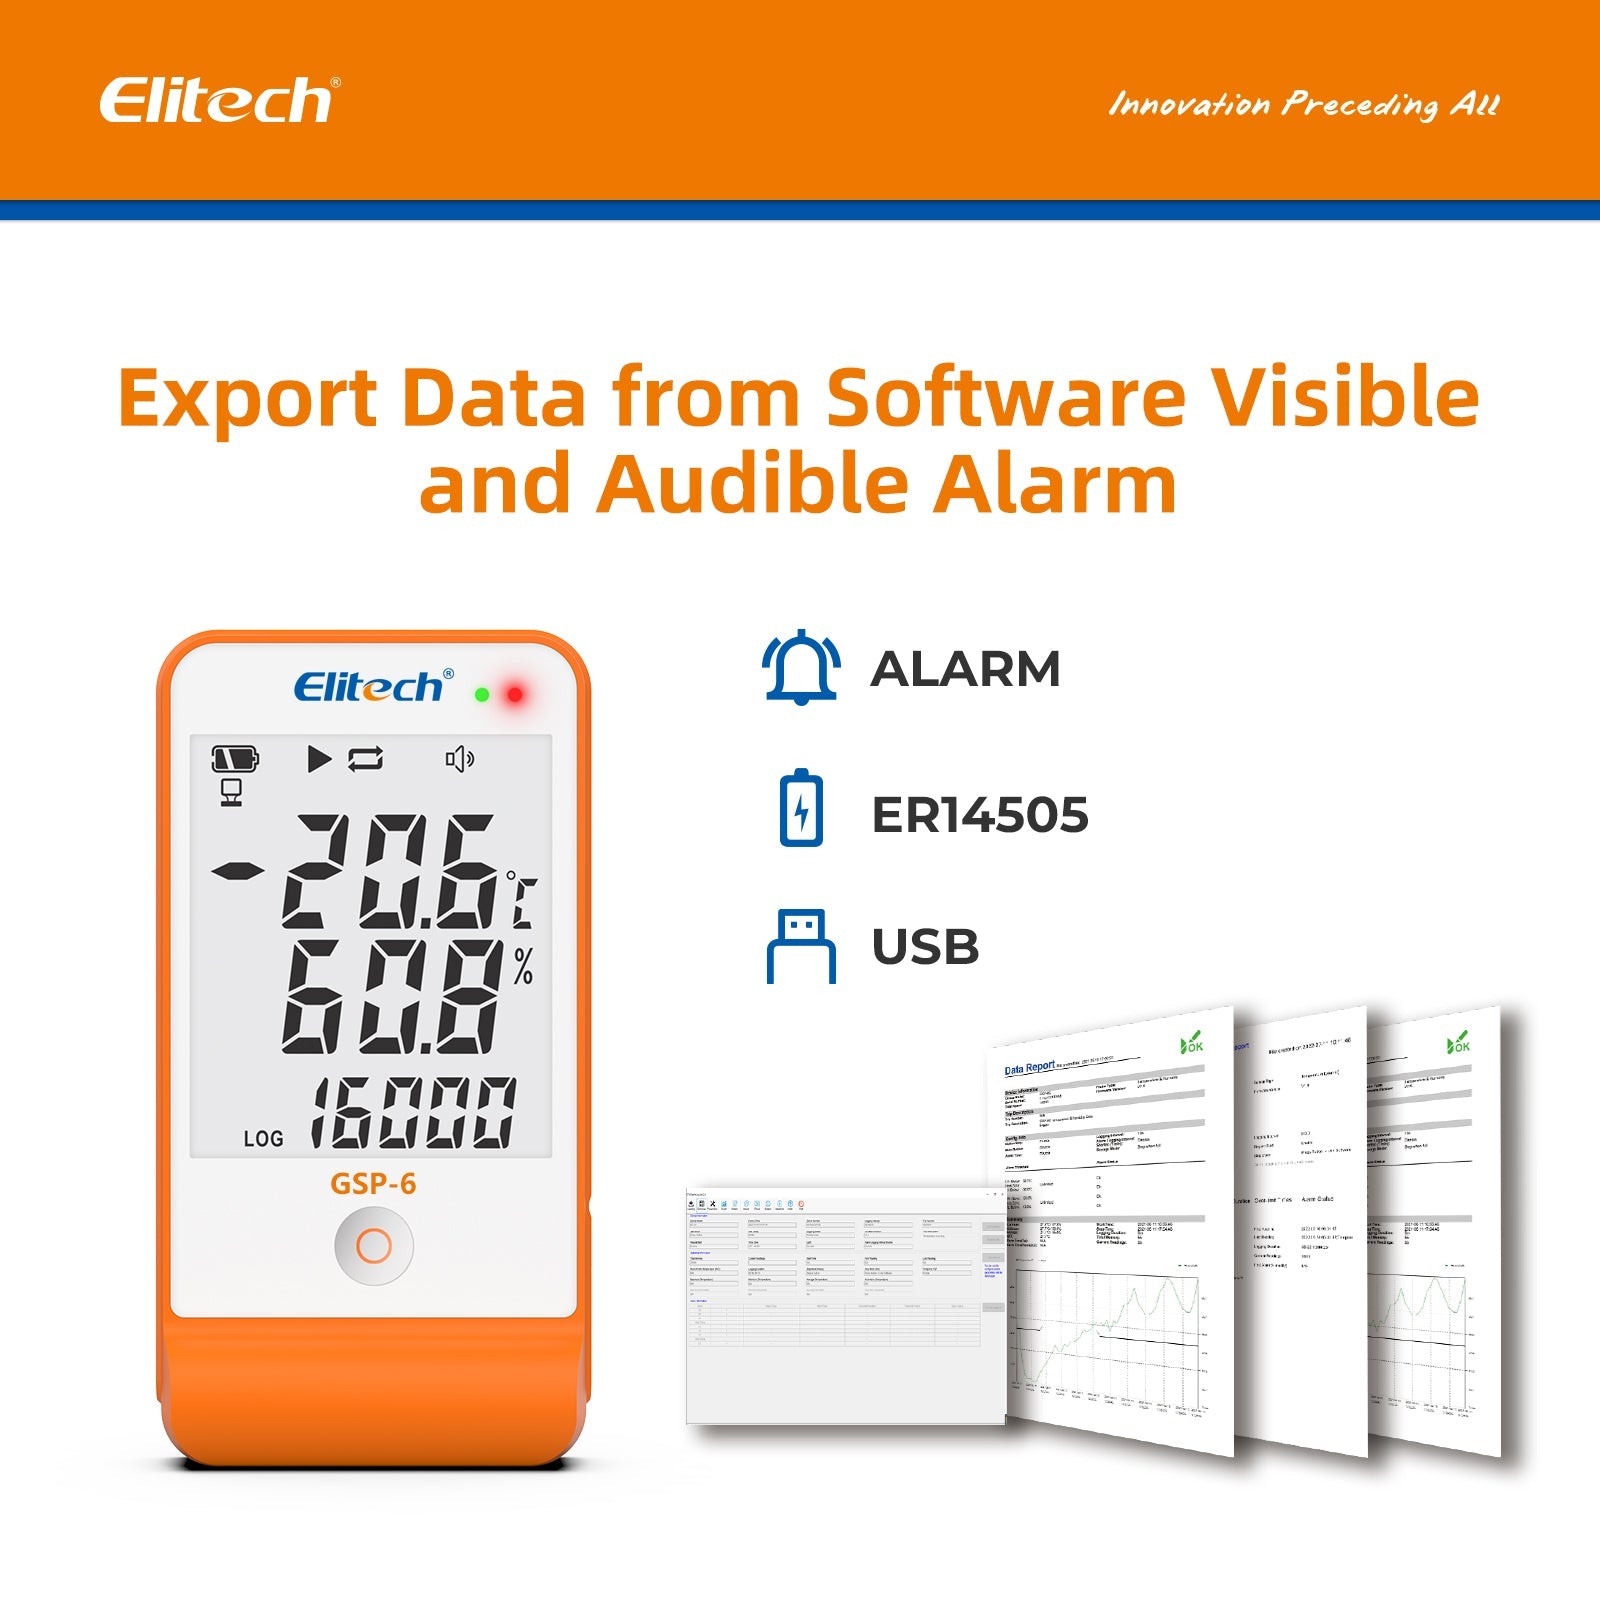 Elitech GSP-6 Digital Temperature and Humidity Data Logger Detachable Dual Probes -40℉ to 158℉ Max Accuracy up to ±0.6℉ Audio Alarm Calibration Certificate Max/Min Value Display - Elitech Technology, Inc.